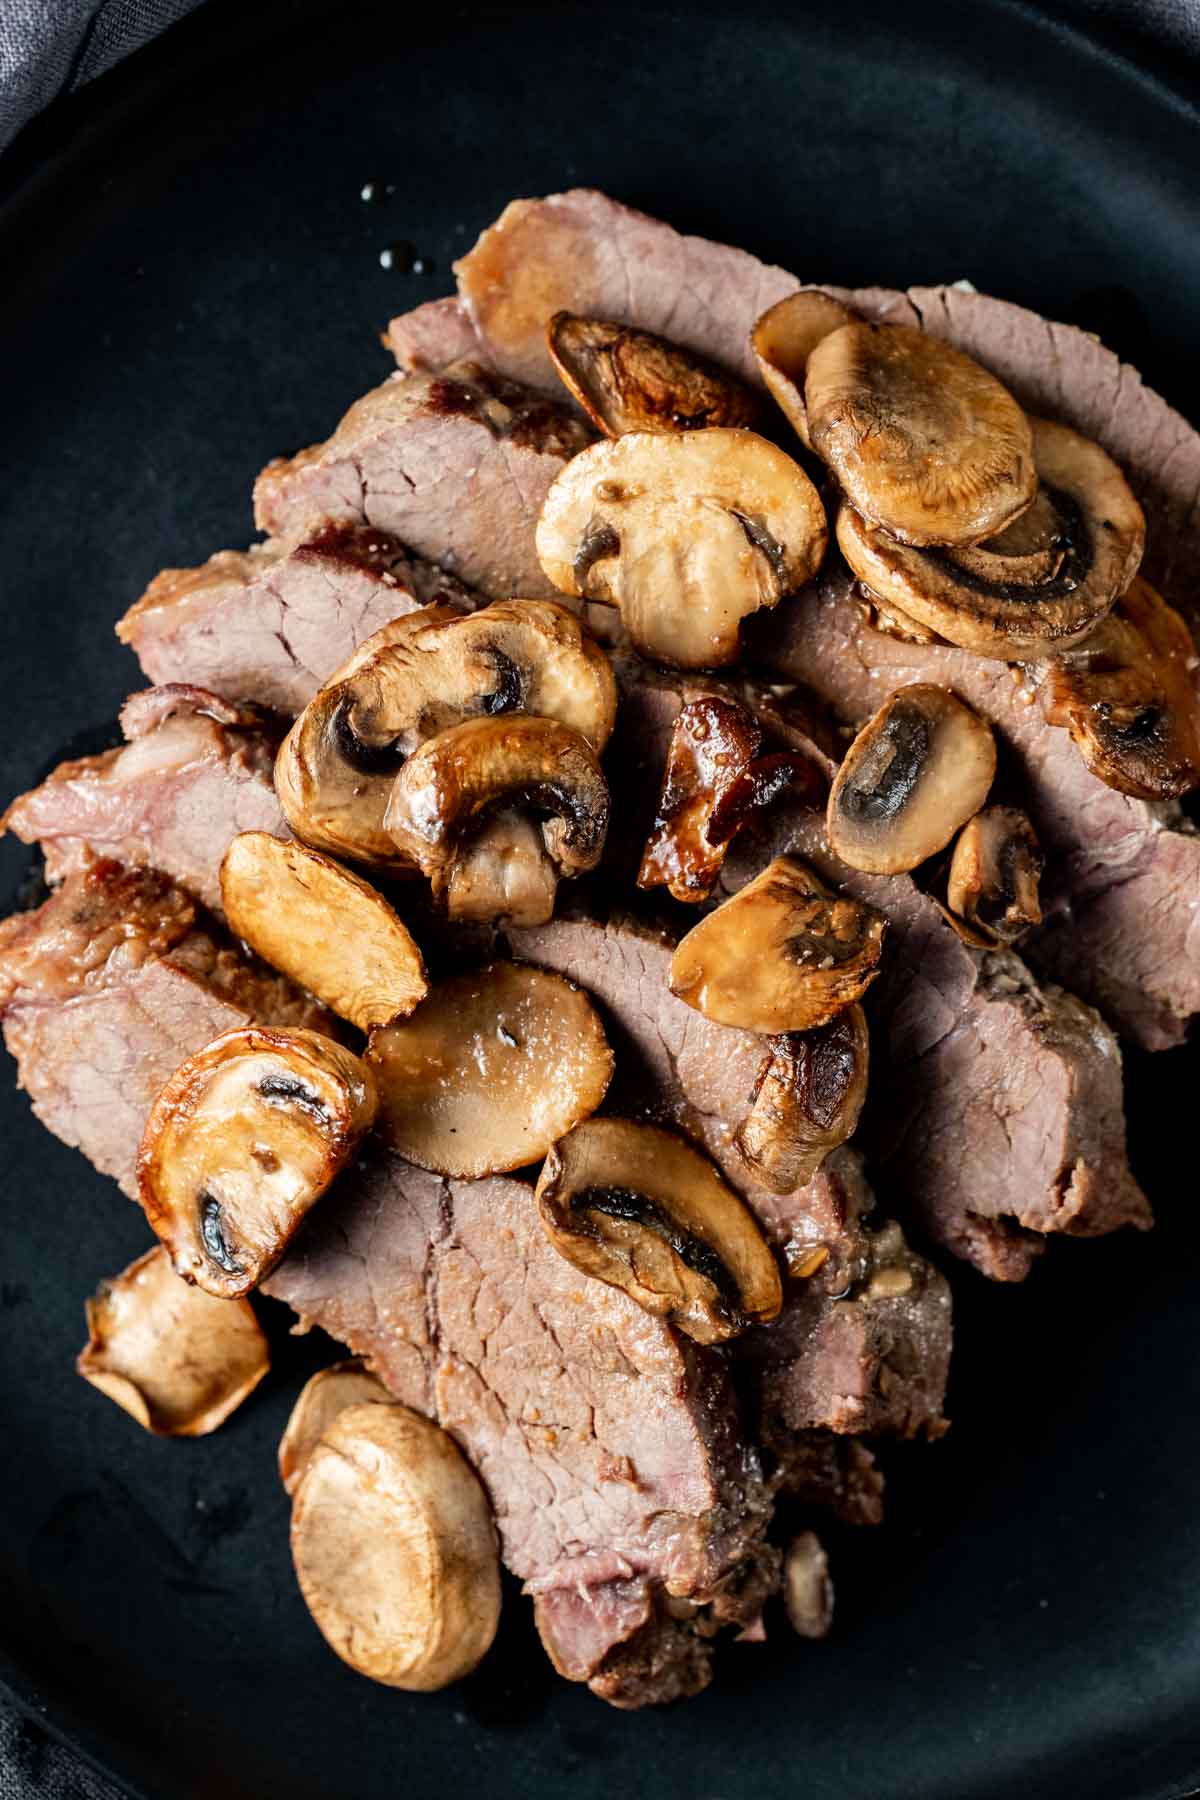 London broil topped with mushrooms and served on a black plate.